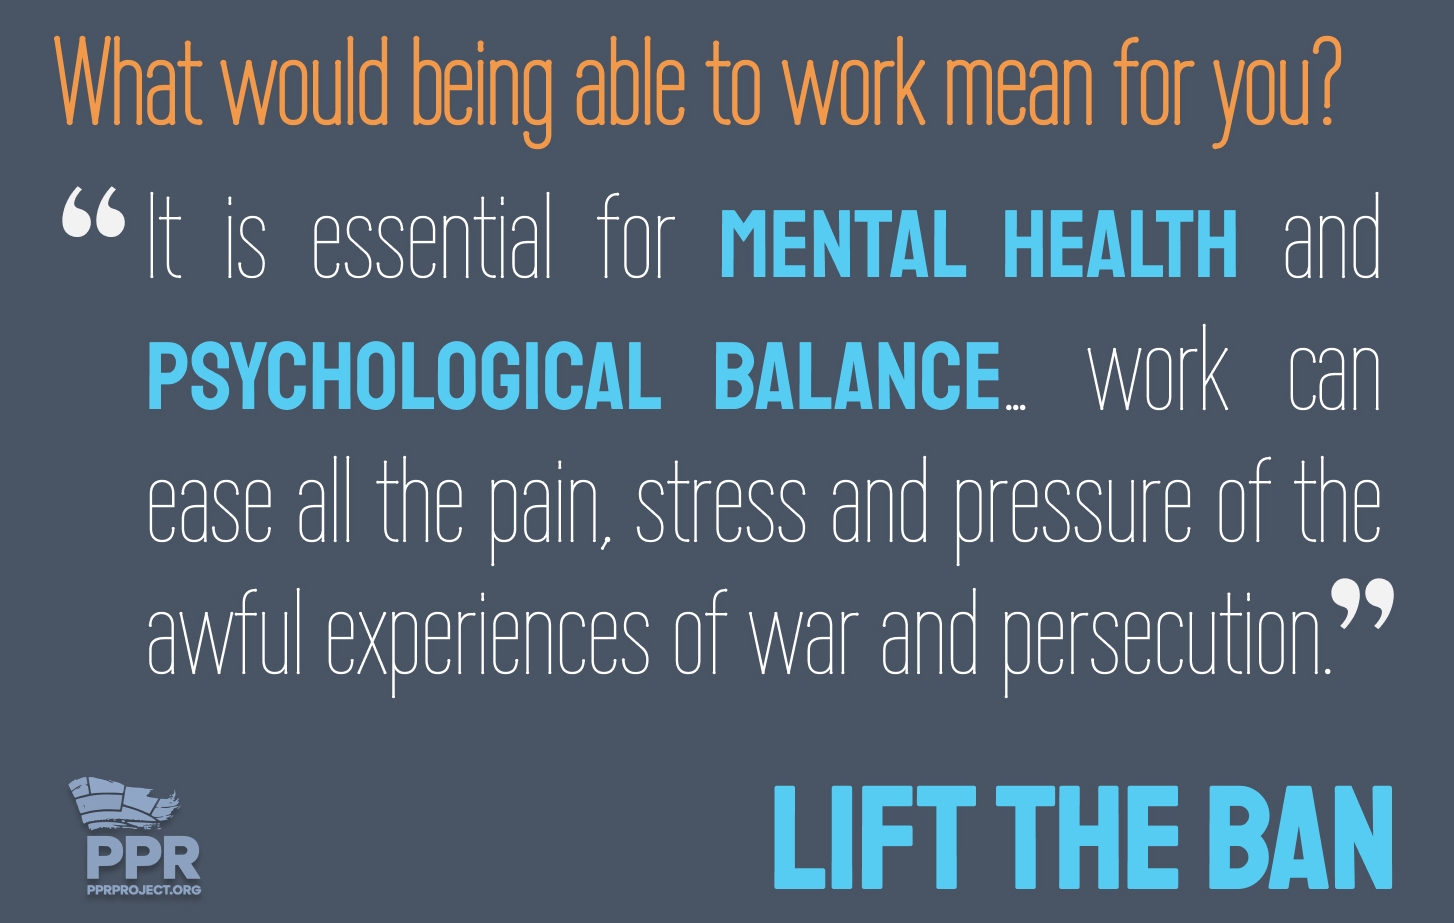 What would being able to work mean for you? It is essential for mental health and psychological balance... Work can ease all the pain, stress and pressure of the awful experiences of war and persecution.